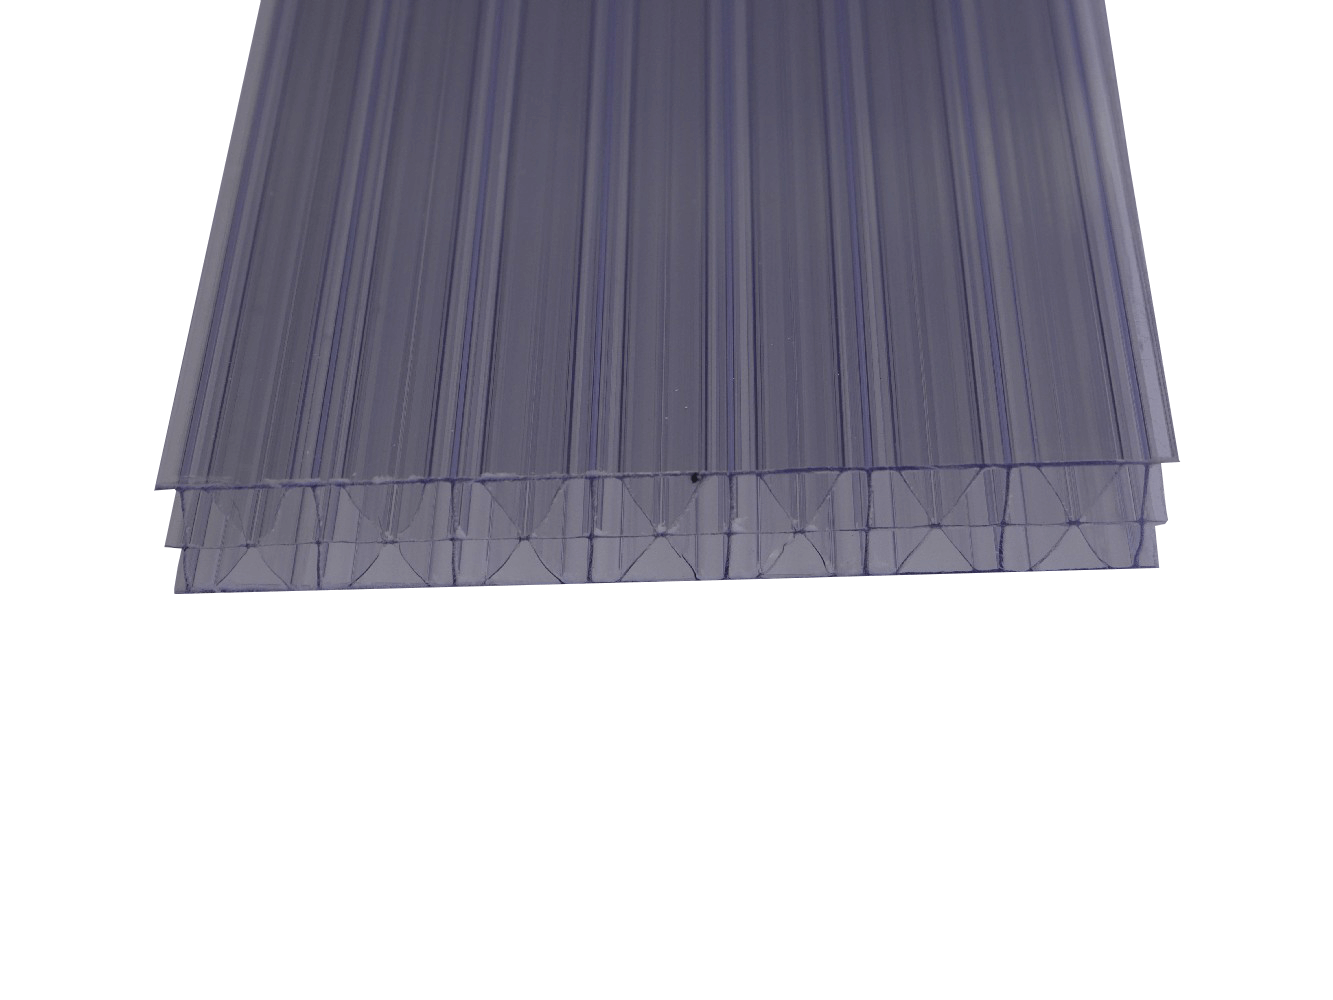 20mm Polycarbonate Roofing Sheet Clear Various Size 10 Year Warranty UV Protection